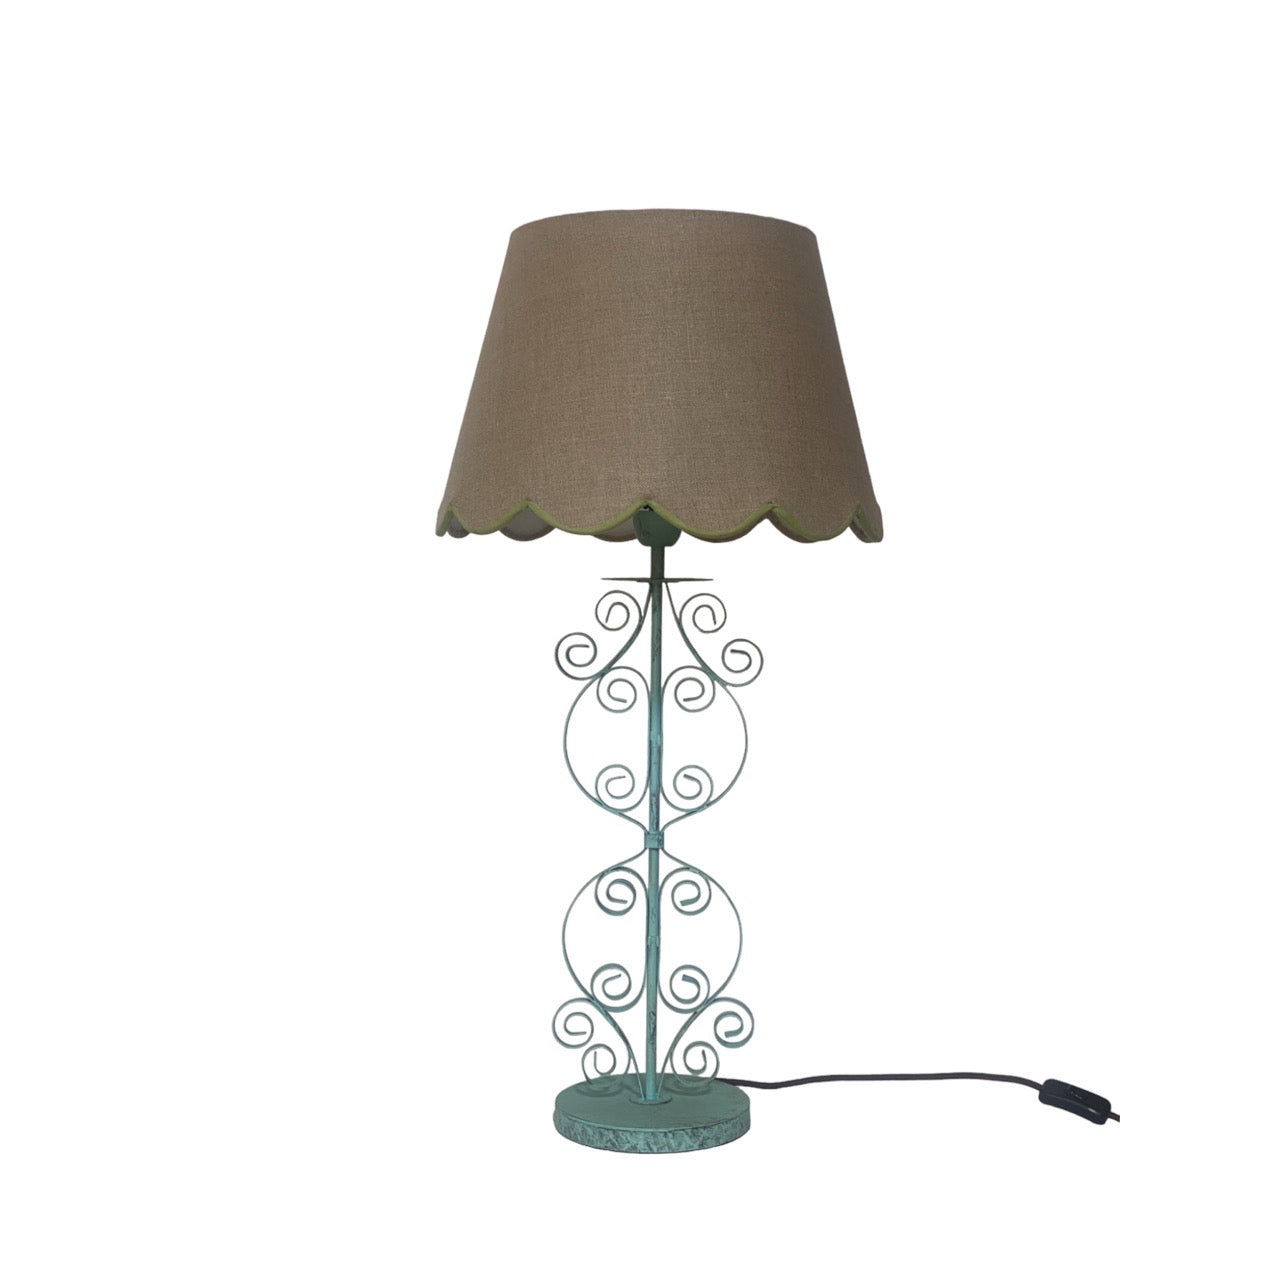 Manali table lamp with scallop lampshade